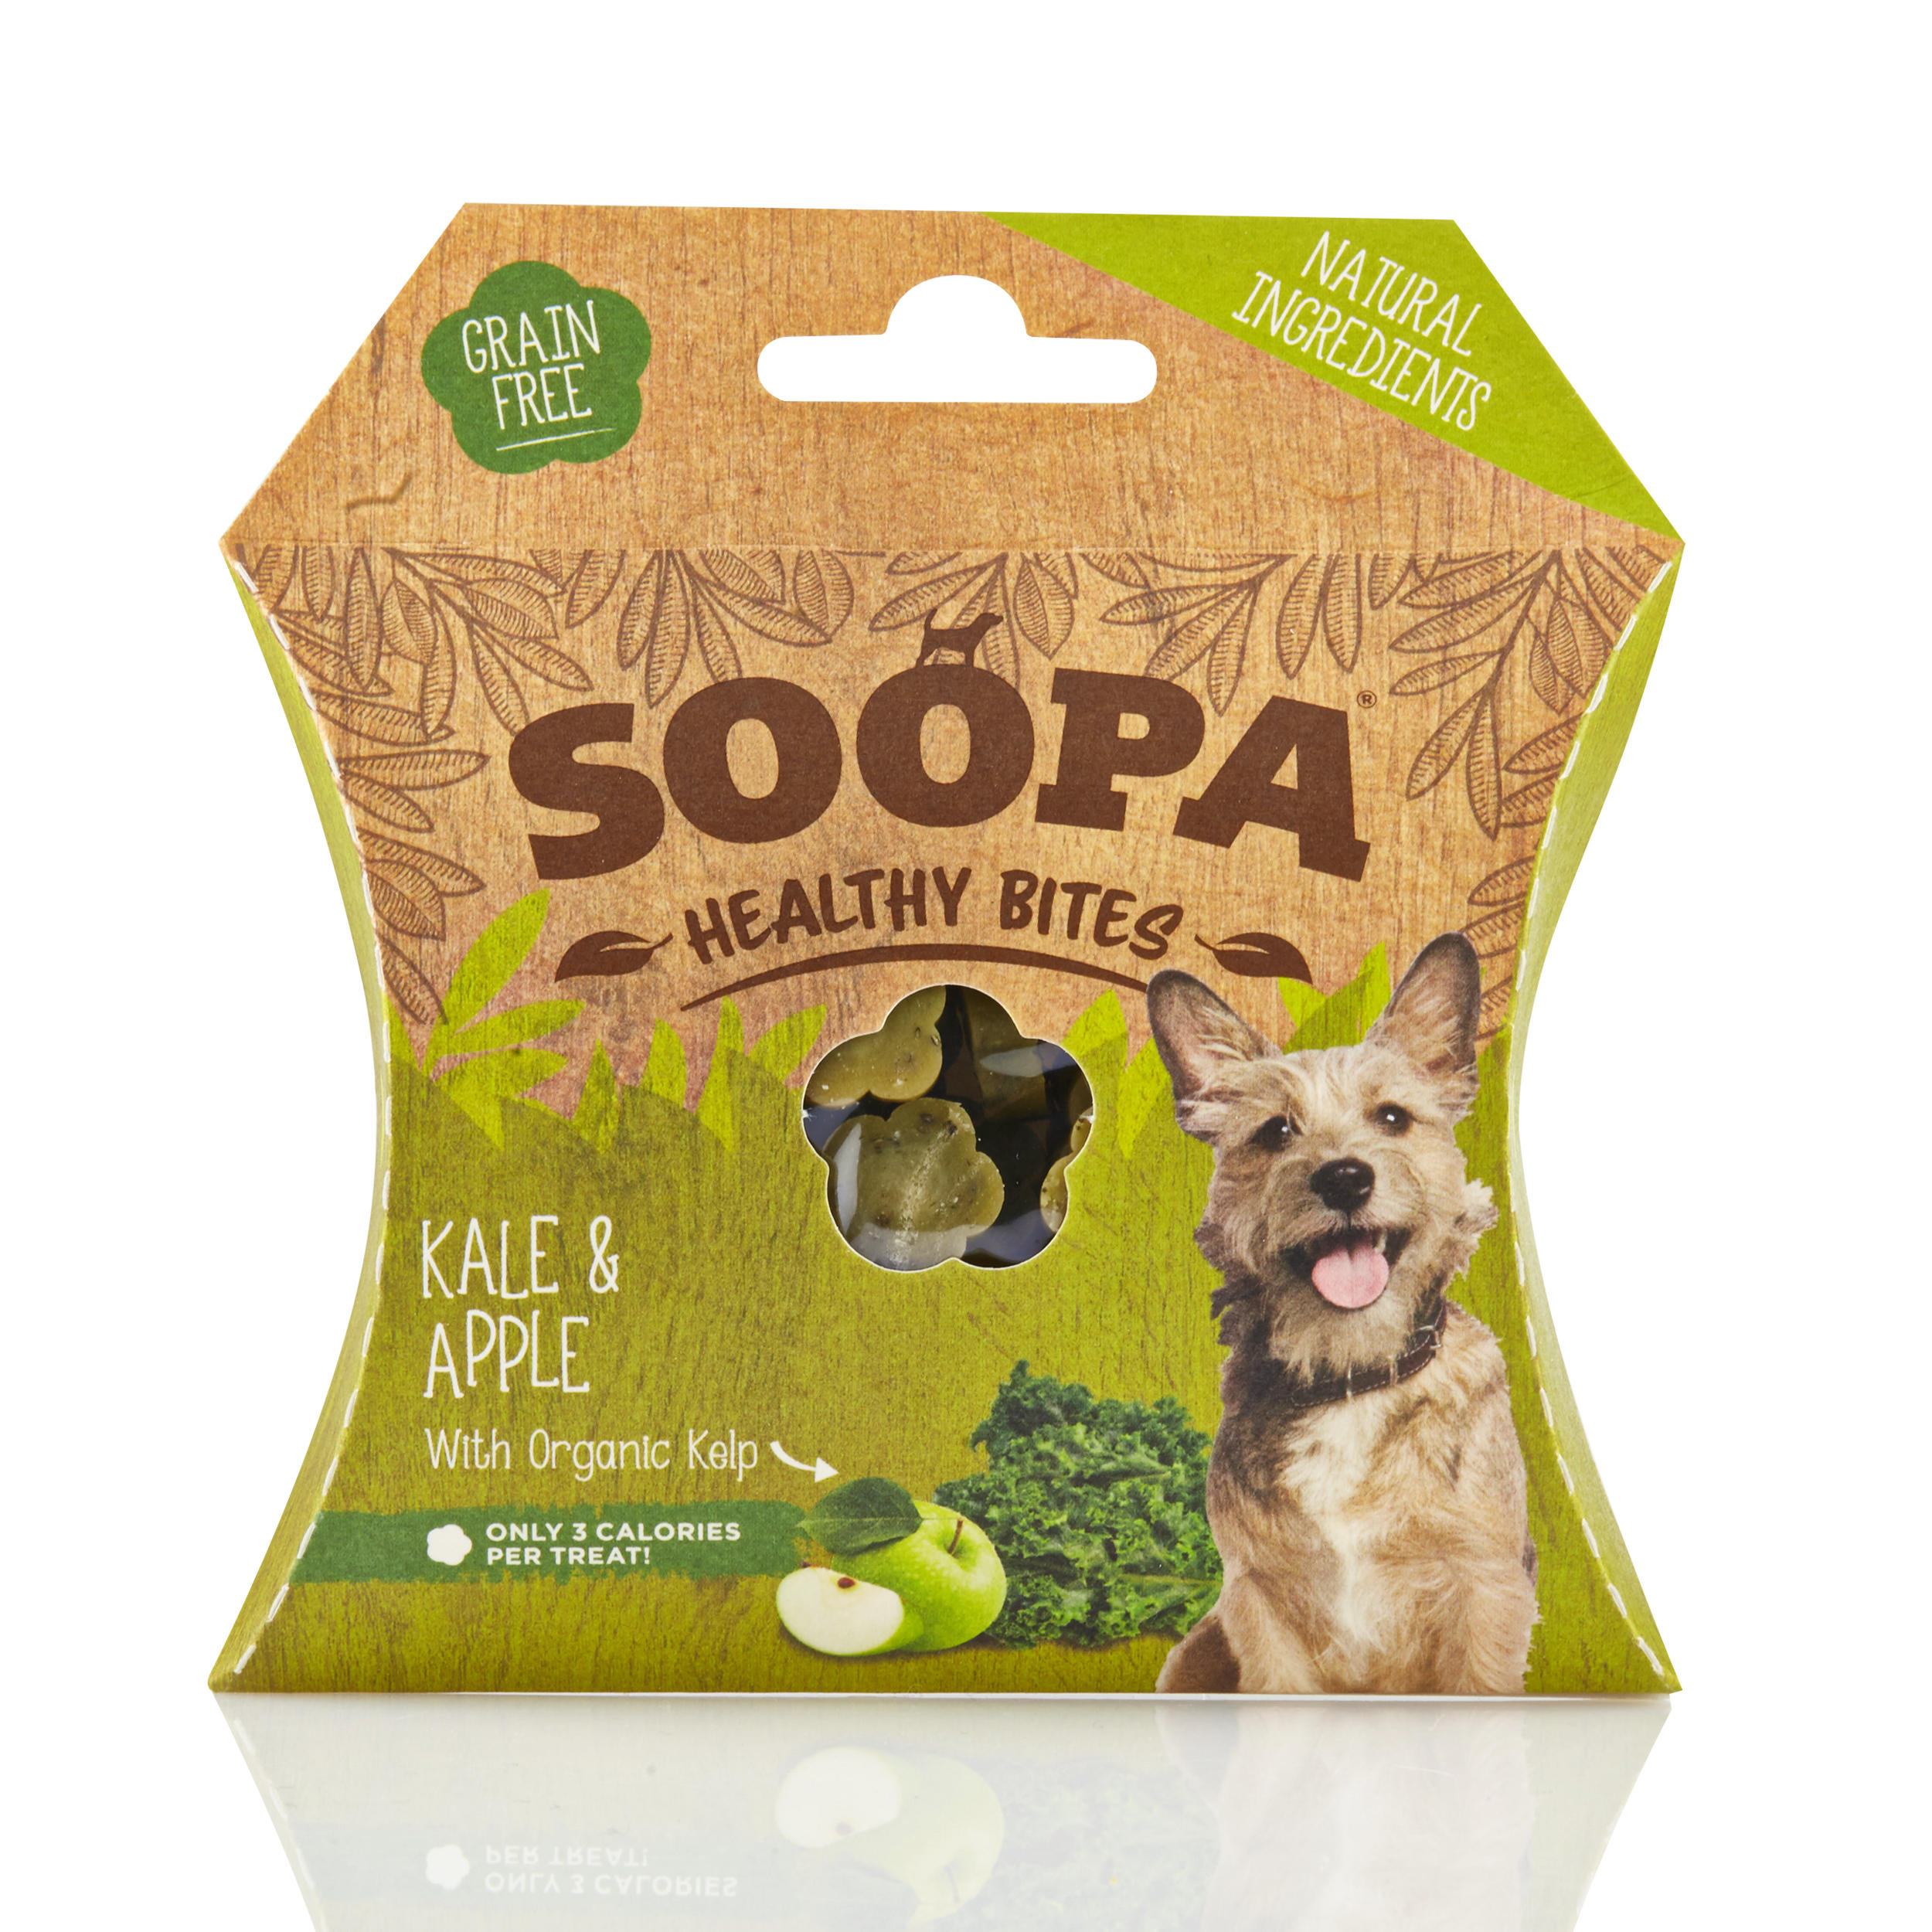 Soopa Kale and apple Healthy Bites